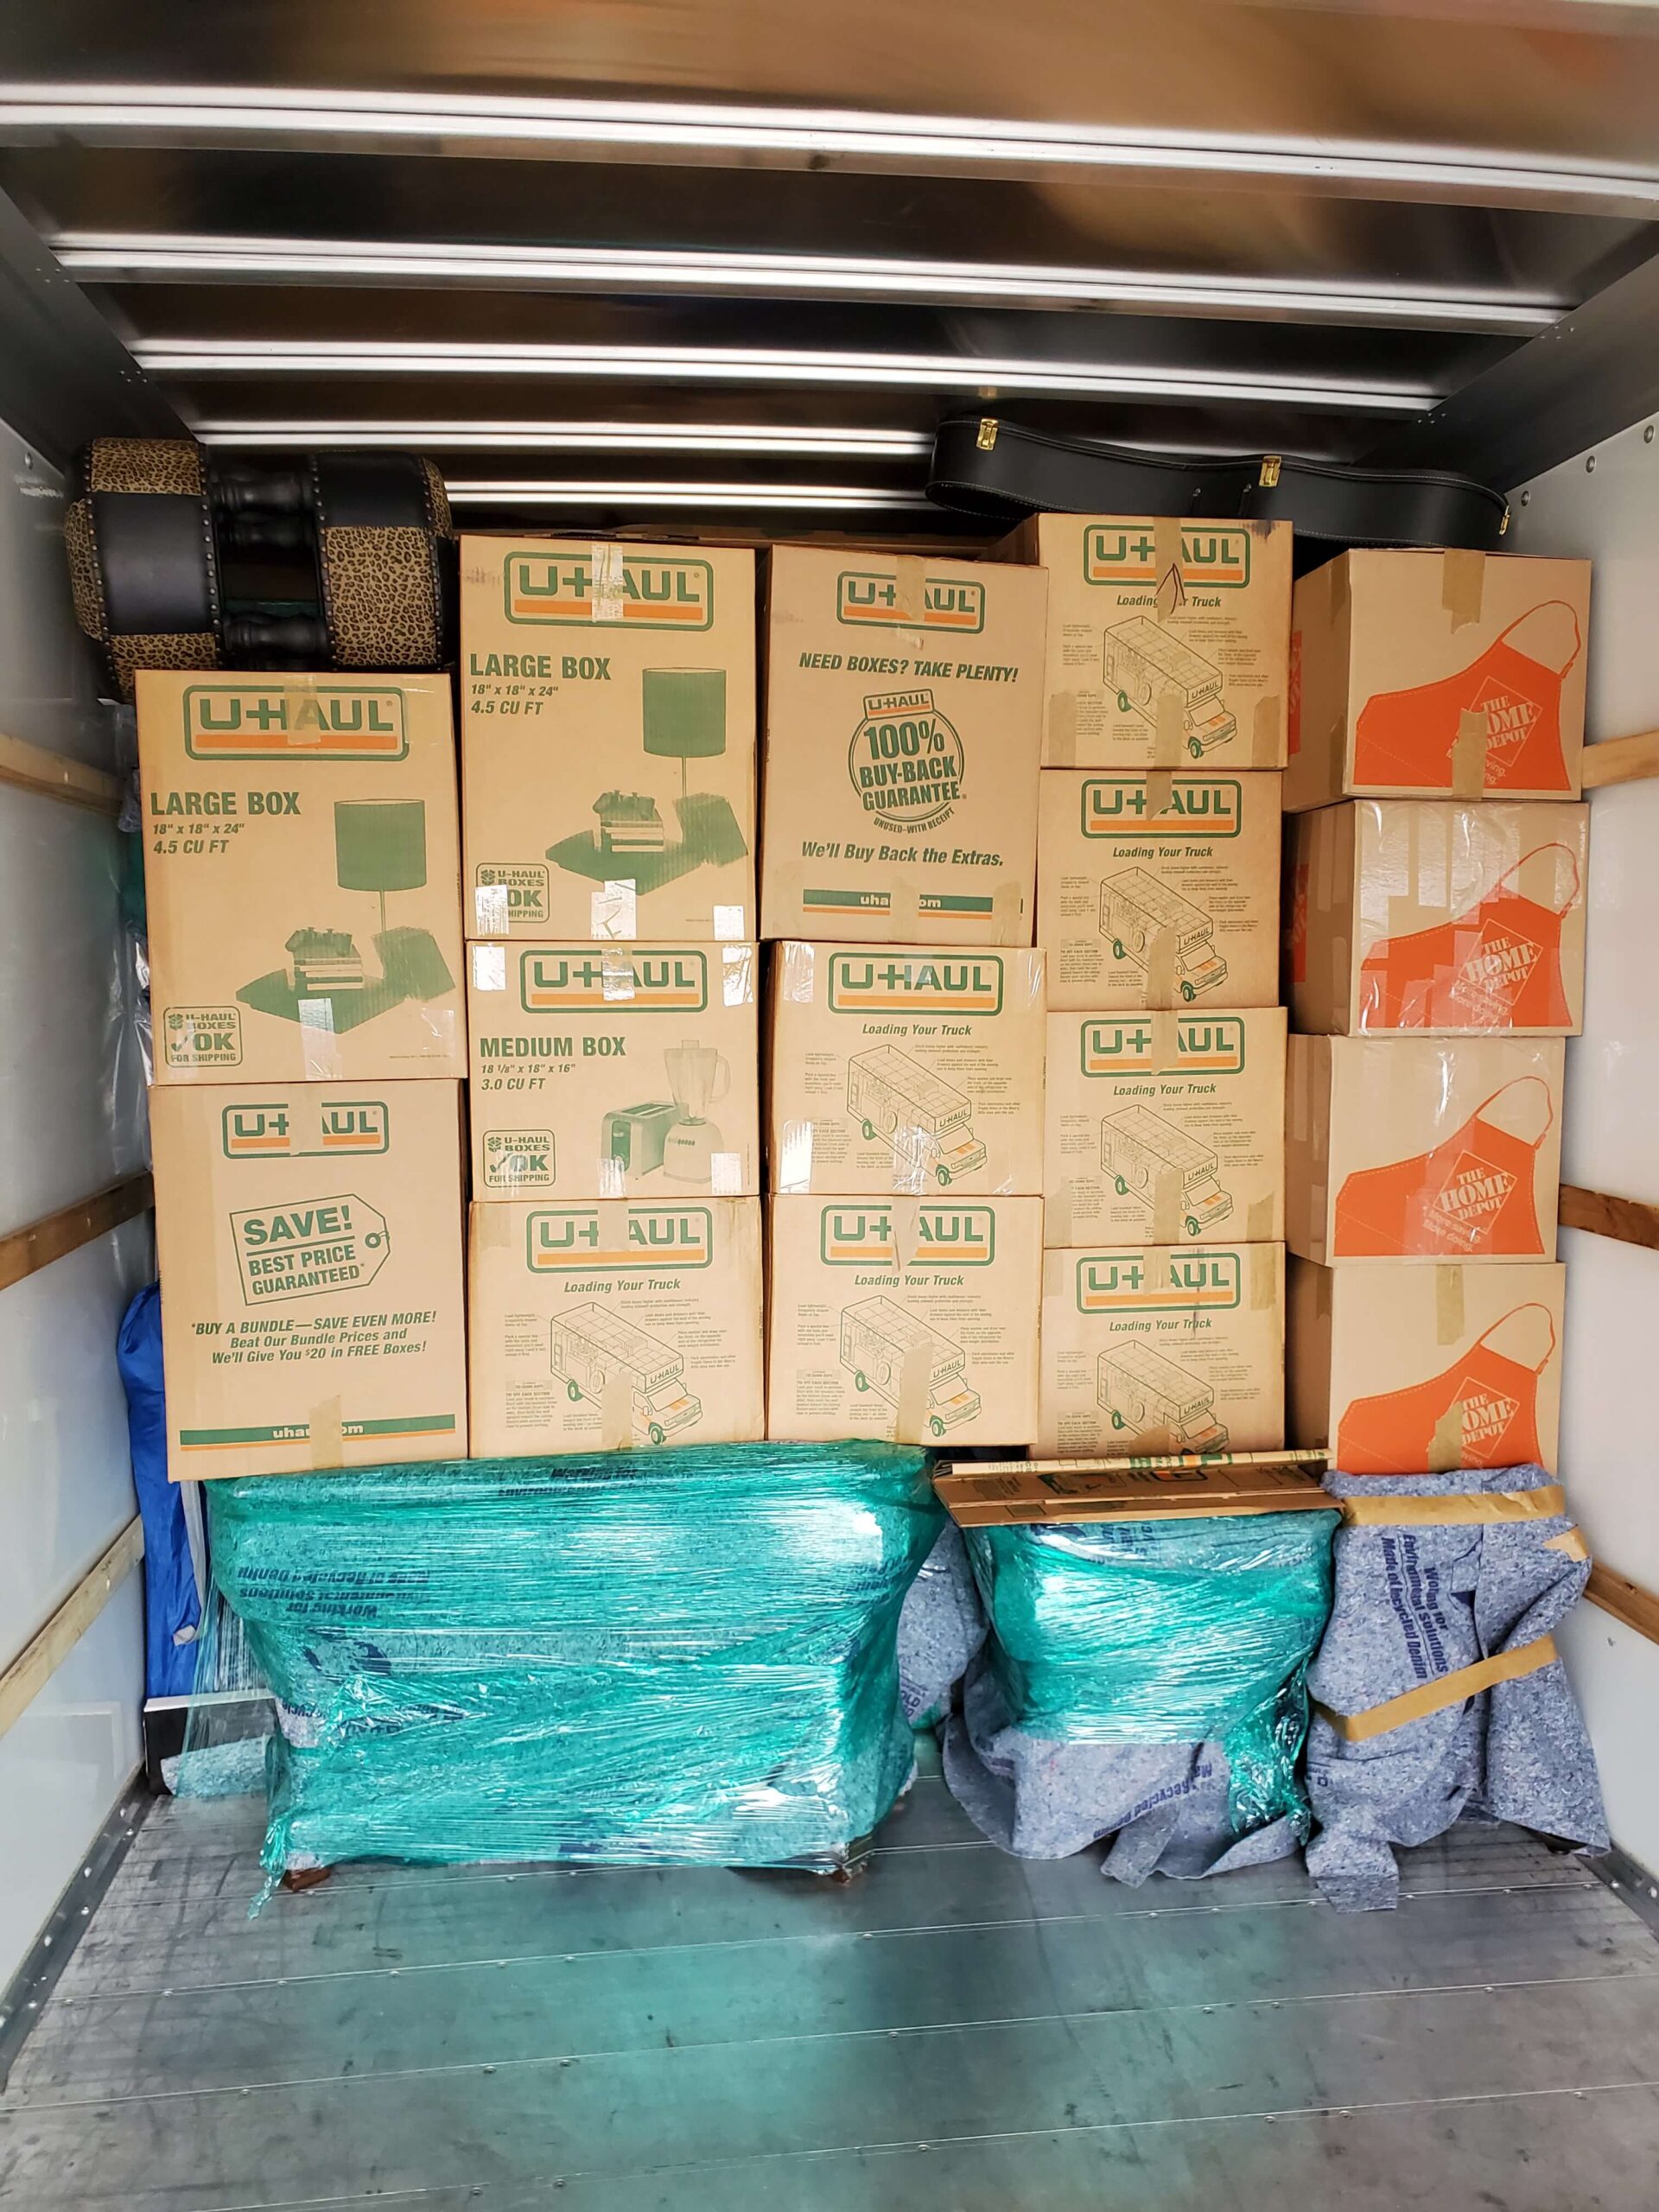 An image of packed boxes in U Haul truck.